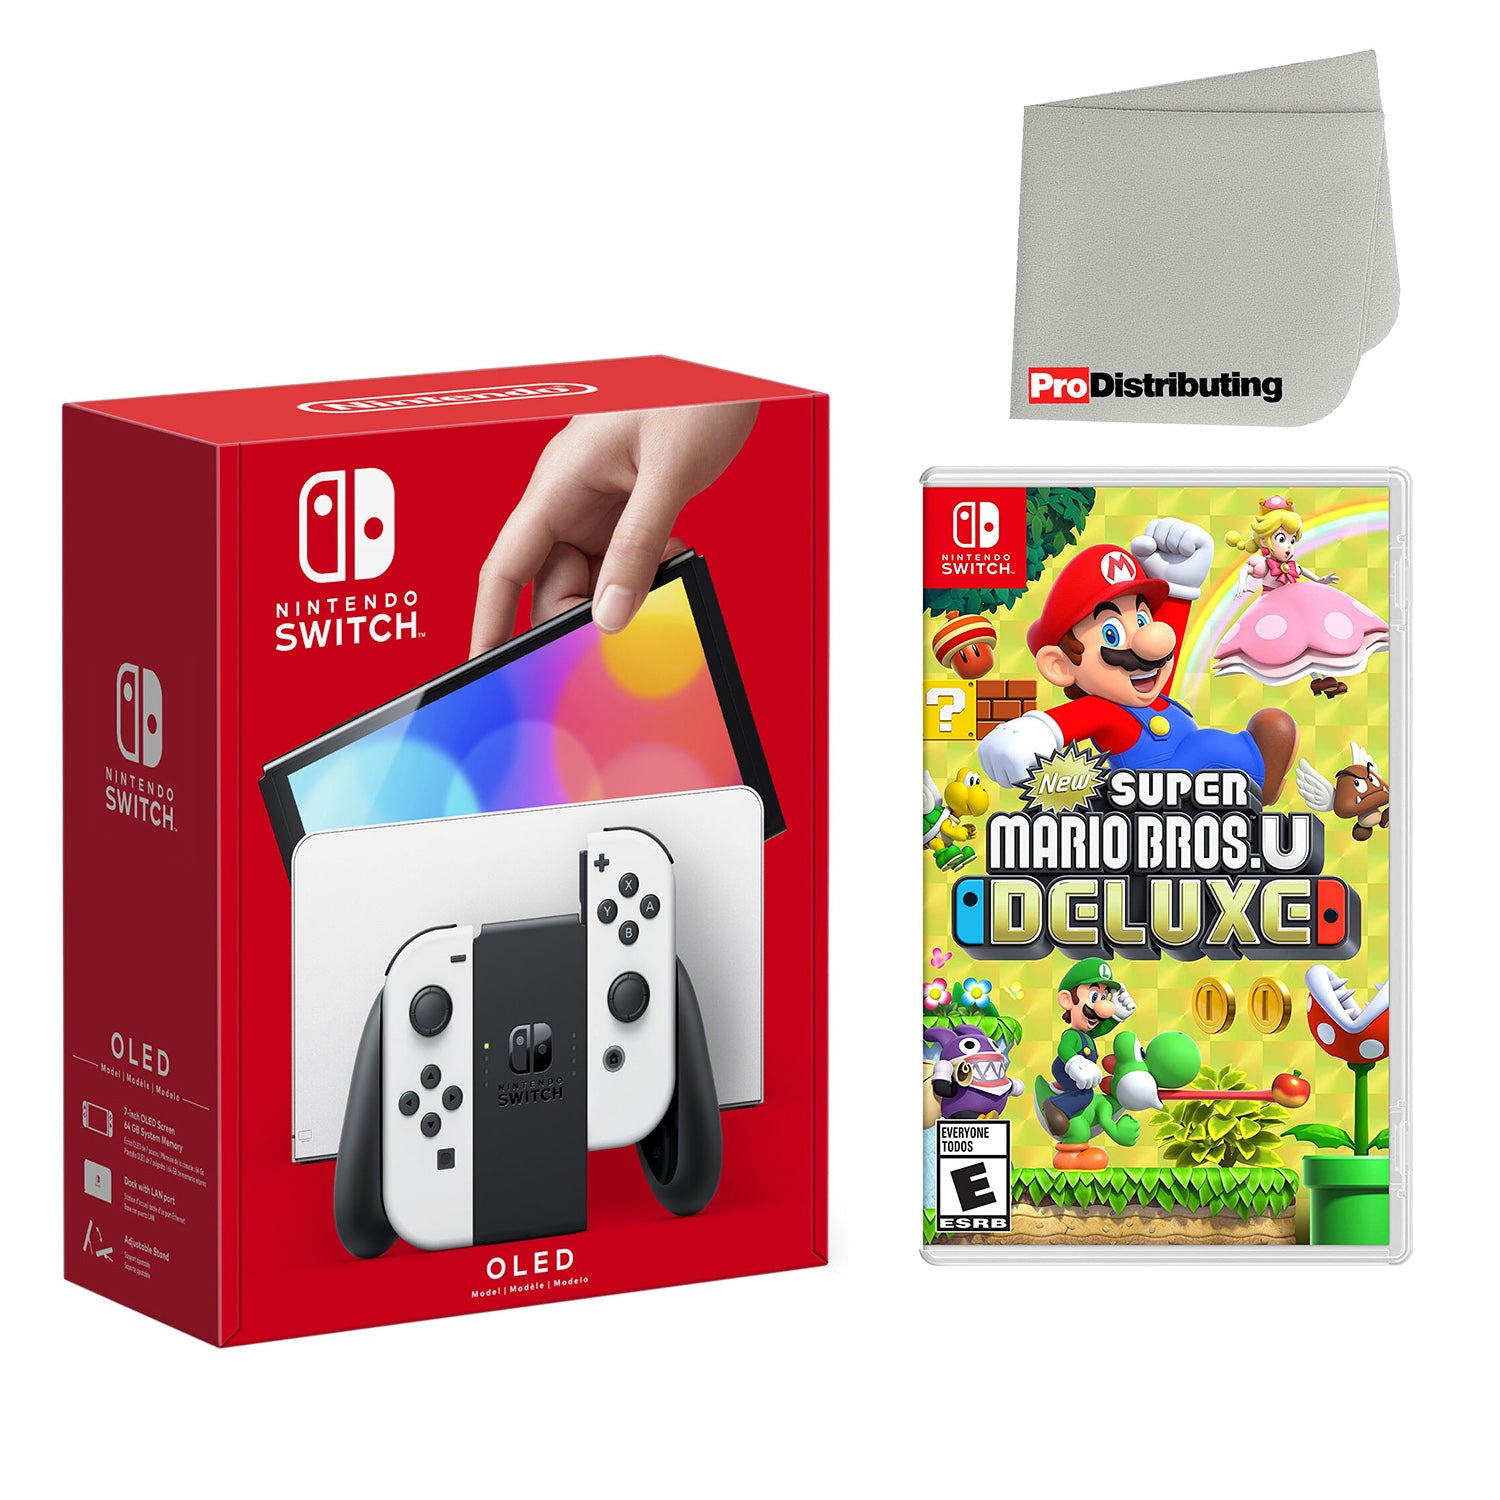 Nintendo Switch OLED Console White with New Super Mario Bros. U Deluxe and Screen Cleaning Cloth - Pro-Distributing